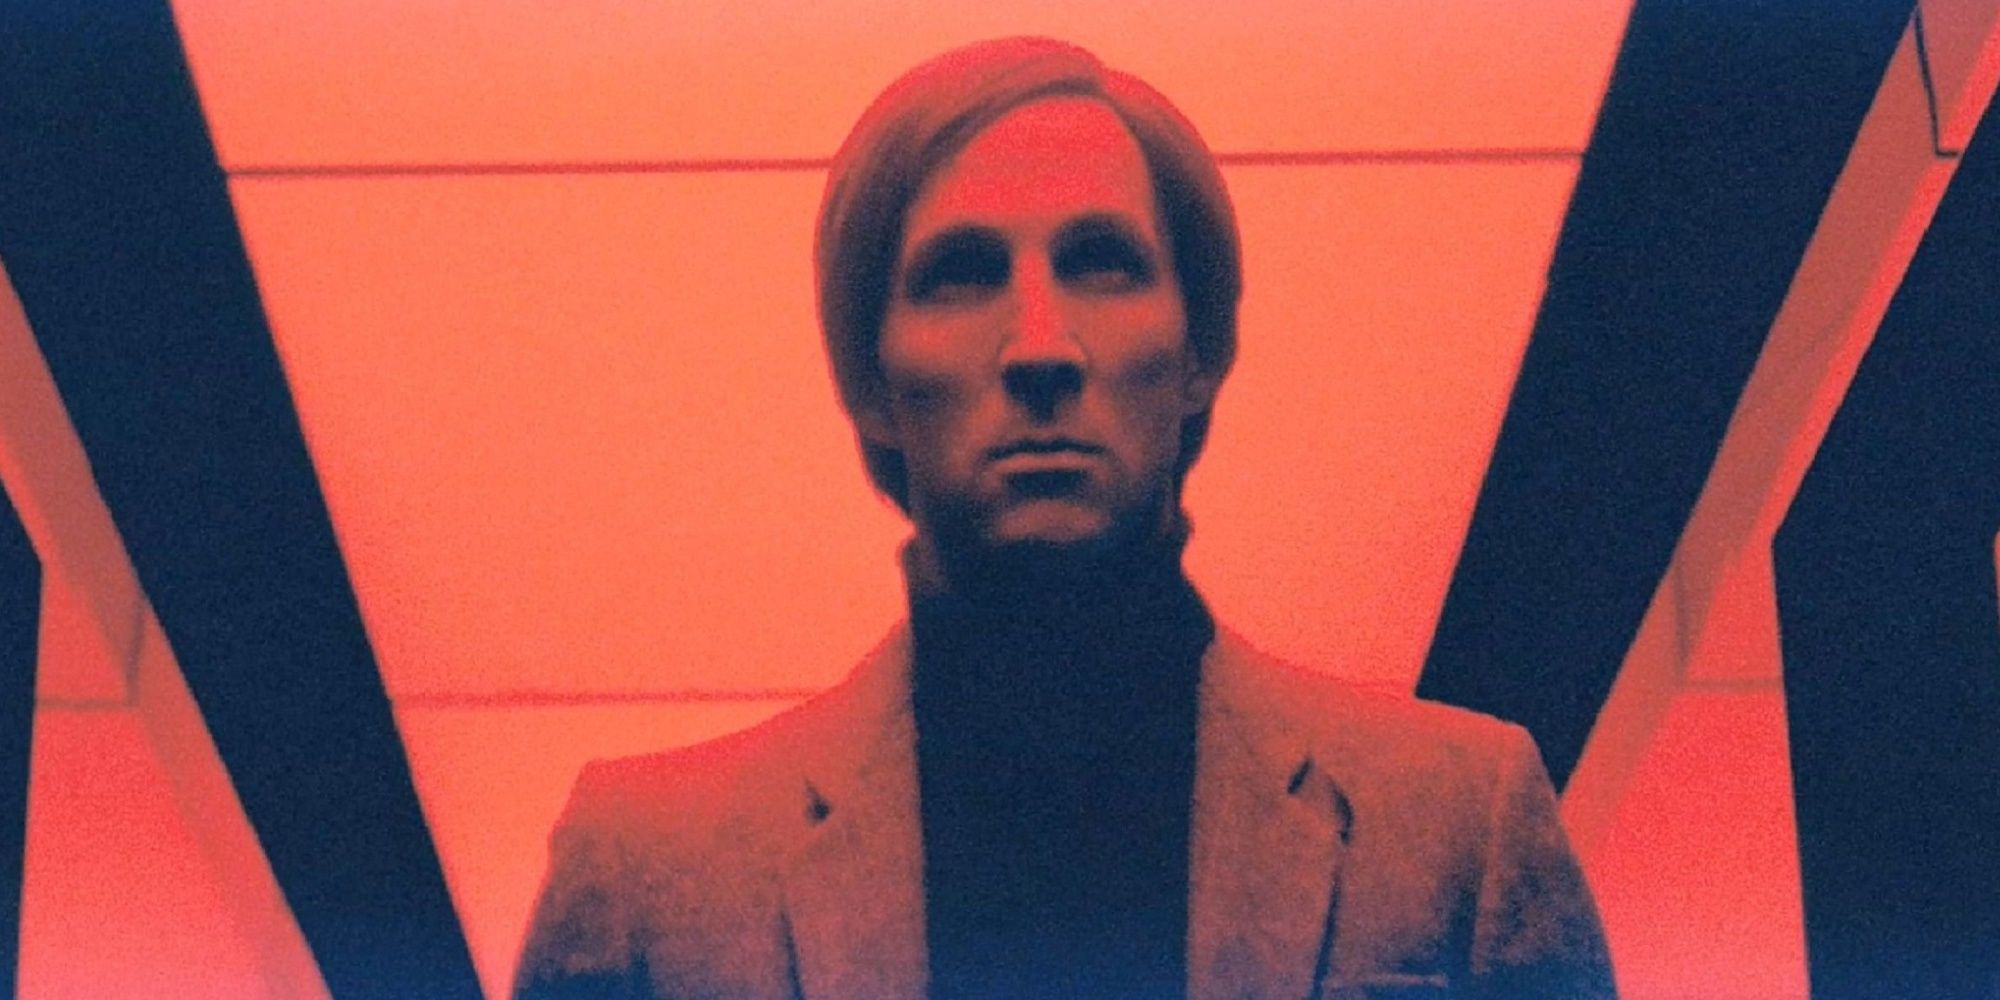 Barry Nile walking down a red-lit hallway in 'Beyond the Black Rainbow.'